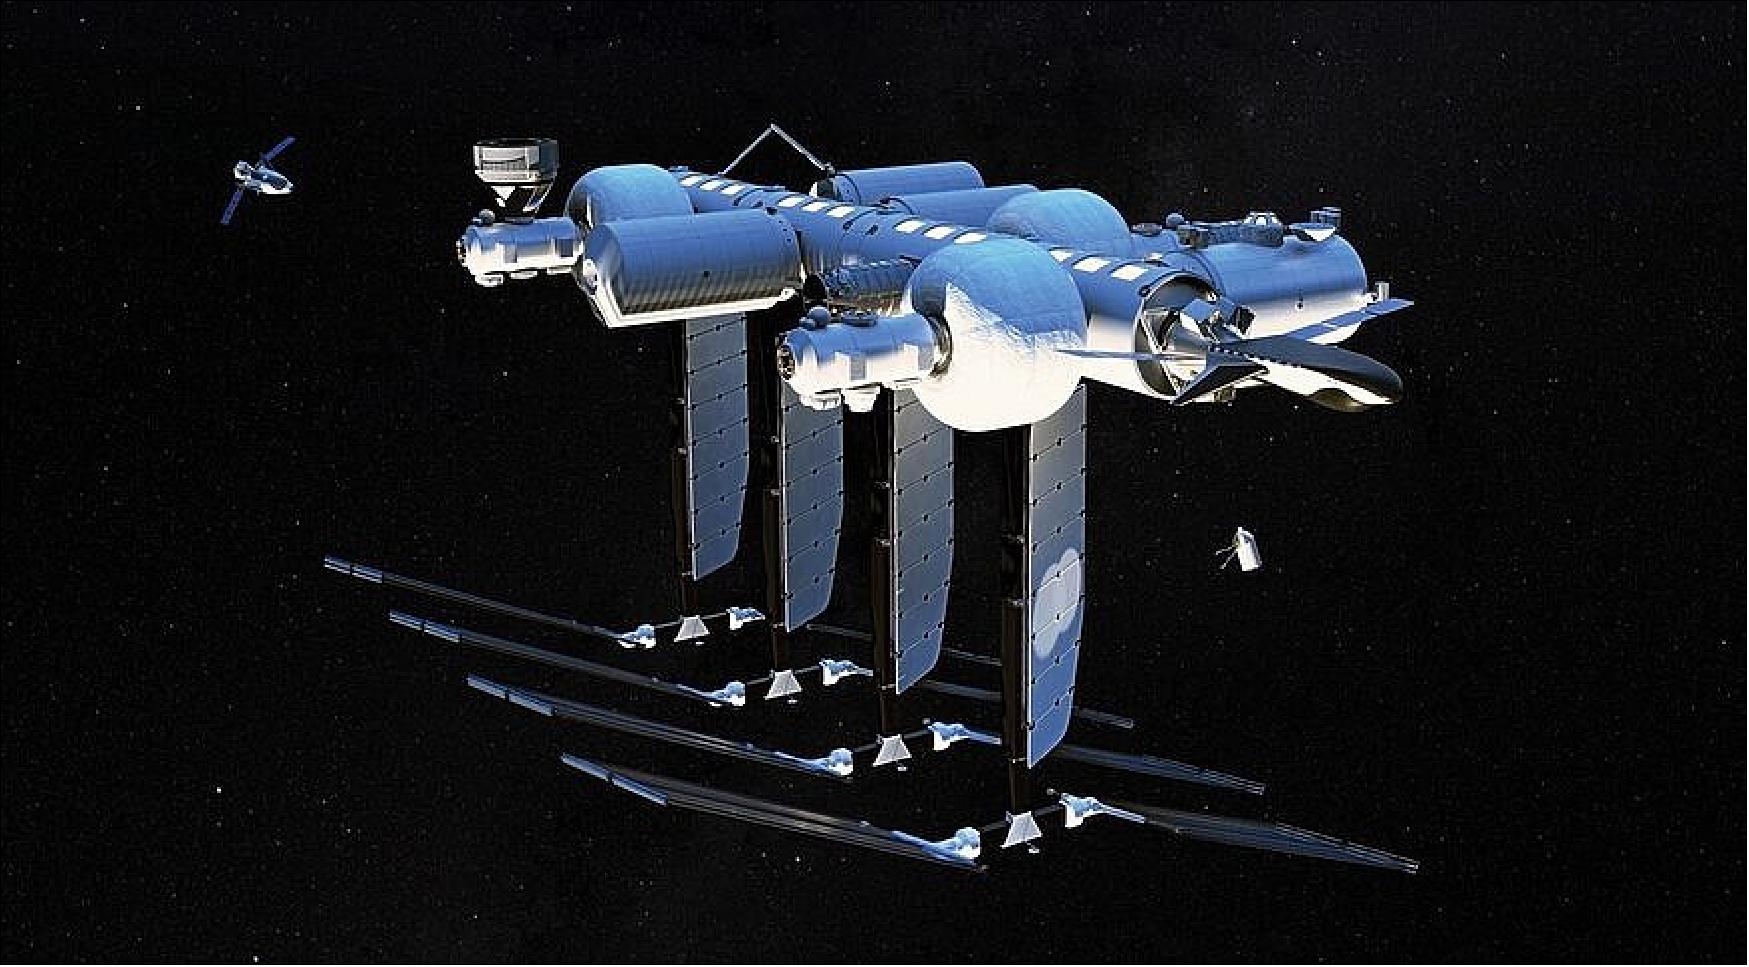 Figure 5: The proposed Orbital Reef station can be expanded over time by adding more modules, but initially will be about one-third the size depicted here (image credit: Blue Origin)